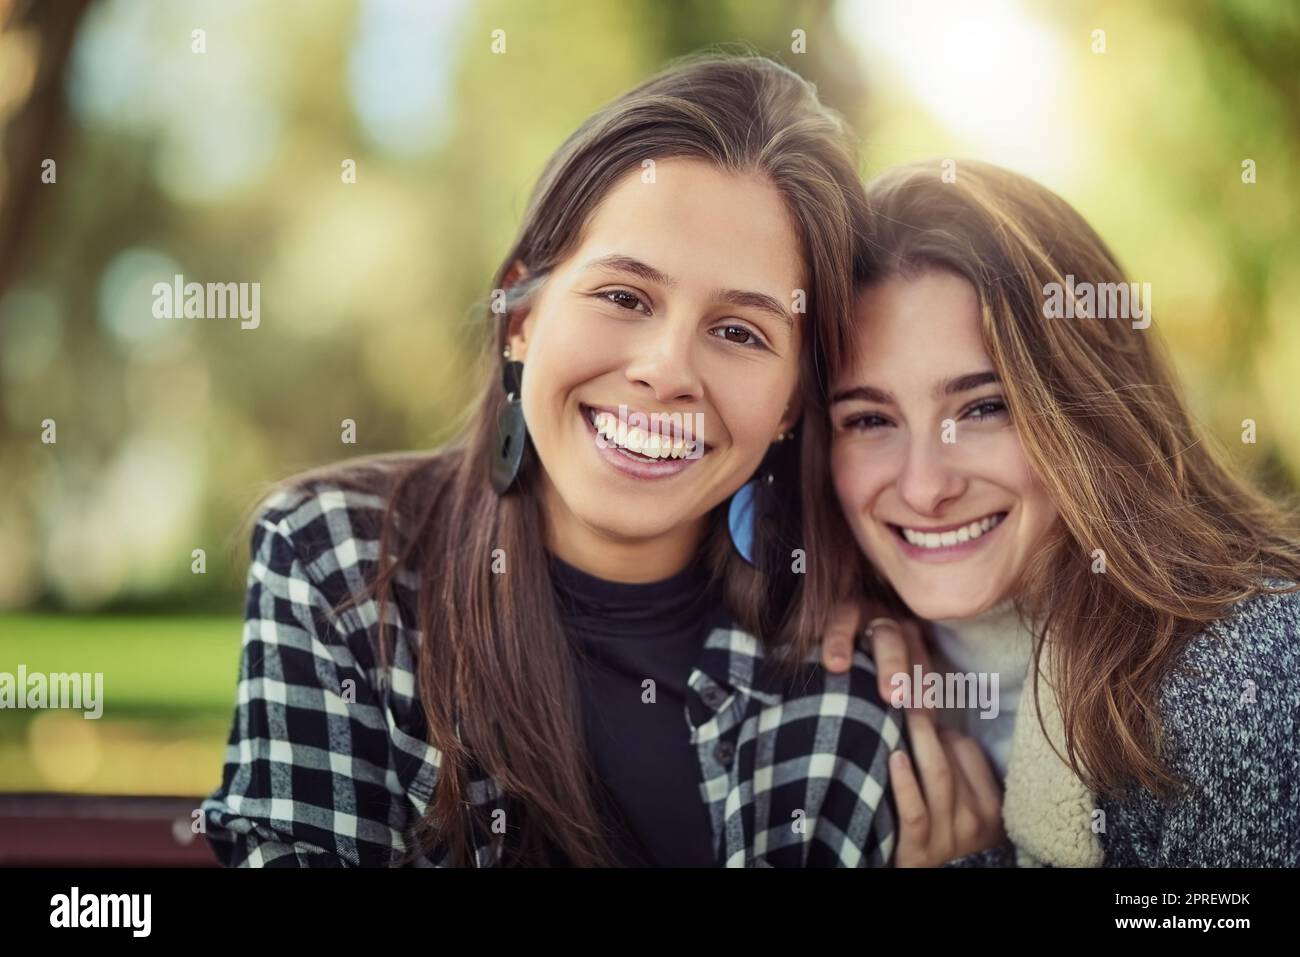 Shes my best friend. Cropped portrait of two attractive young women spending the day outdoors. Stock Photo